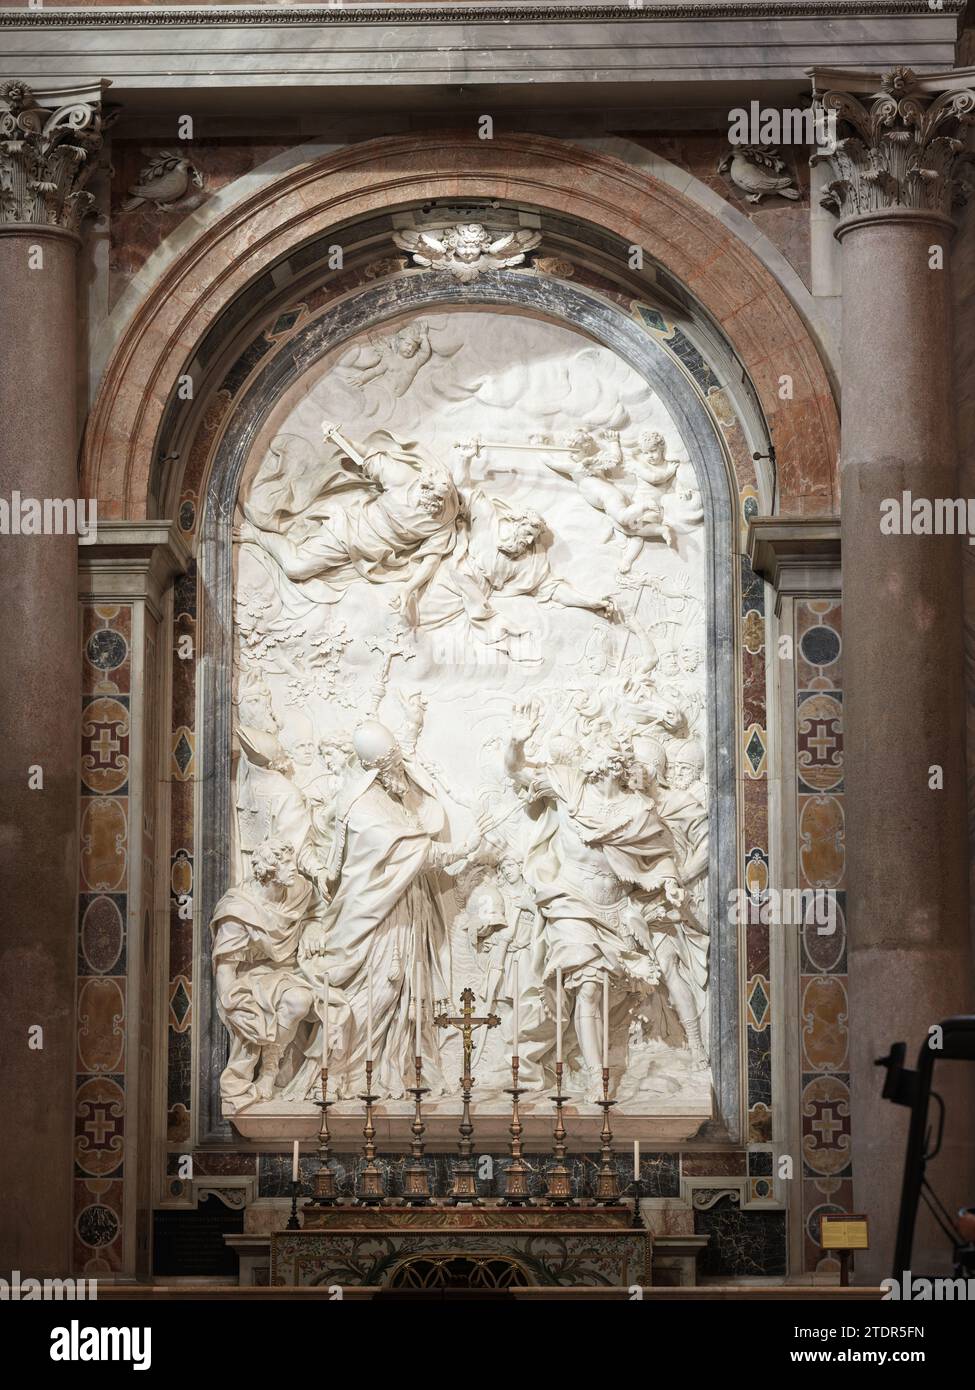 Marble altarpiece by Alessandro Algardi (1602-1625) in St Peter's basilica, Rome, Vatican, Italy, showing Pope Leo the Great with Attila the Hun. Stock Photo